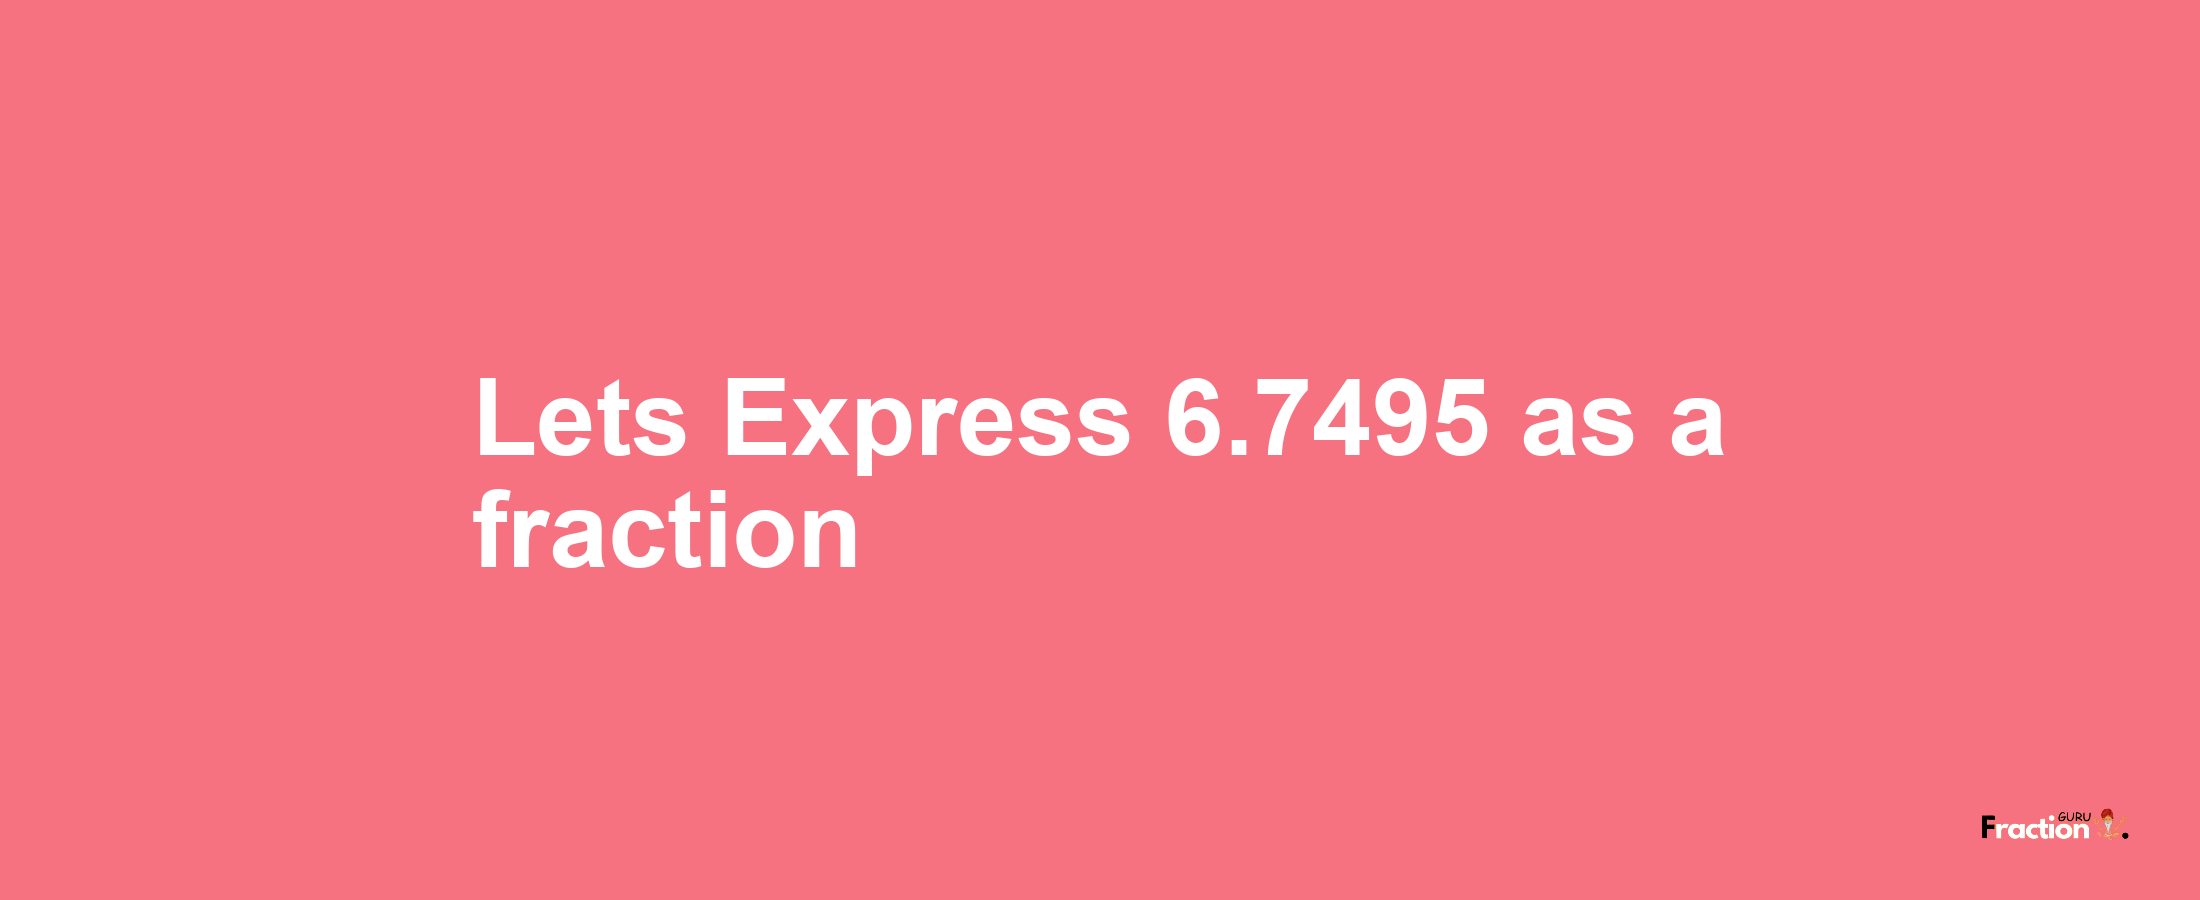 Lets Express 6.7495 as afraction